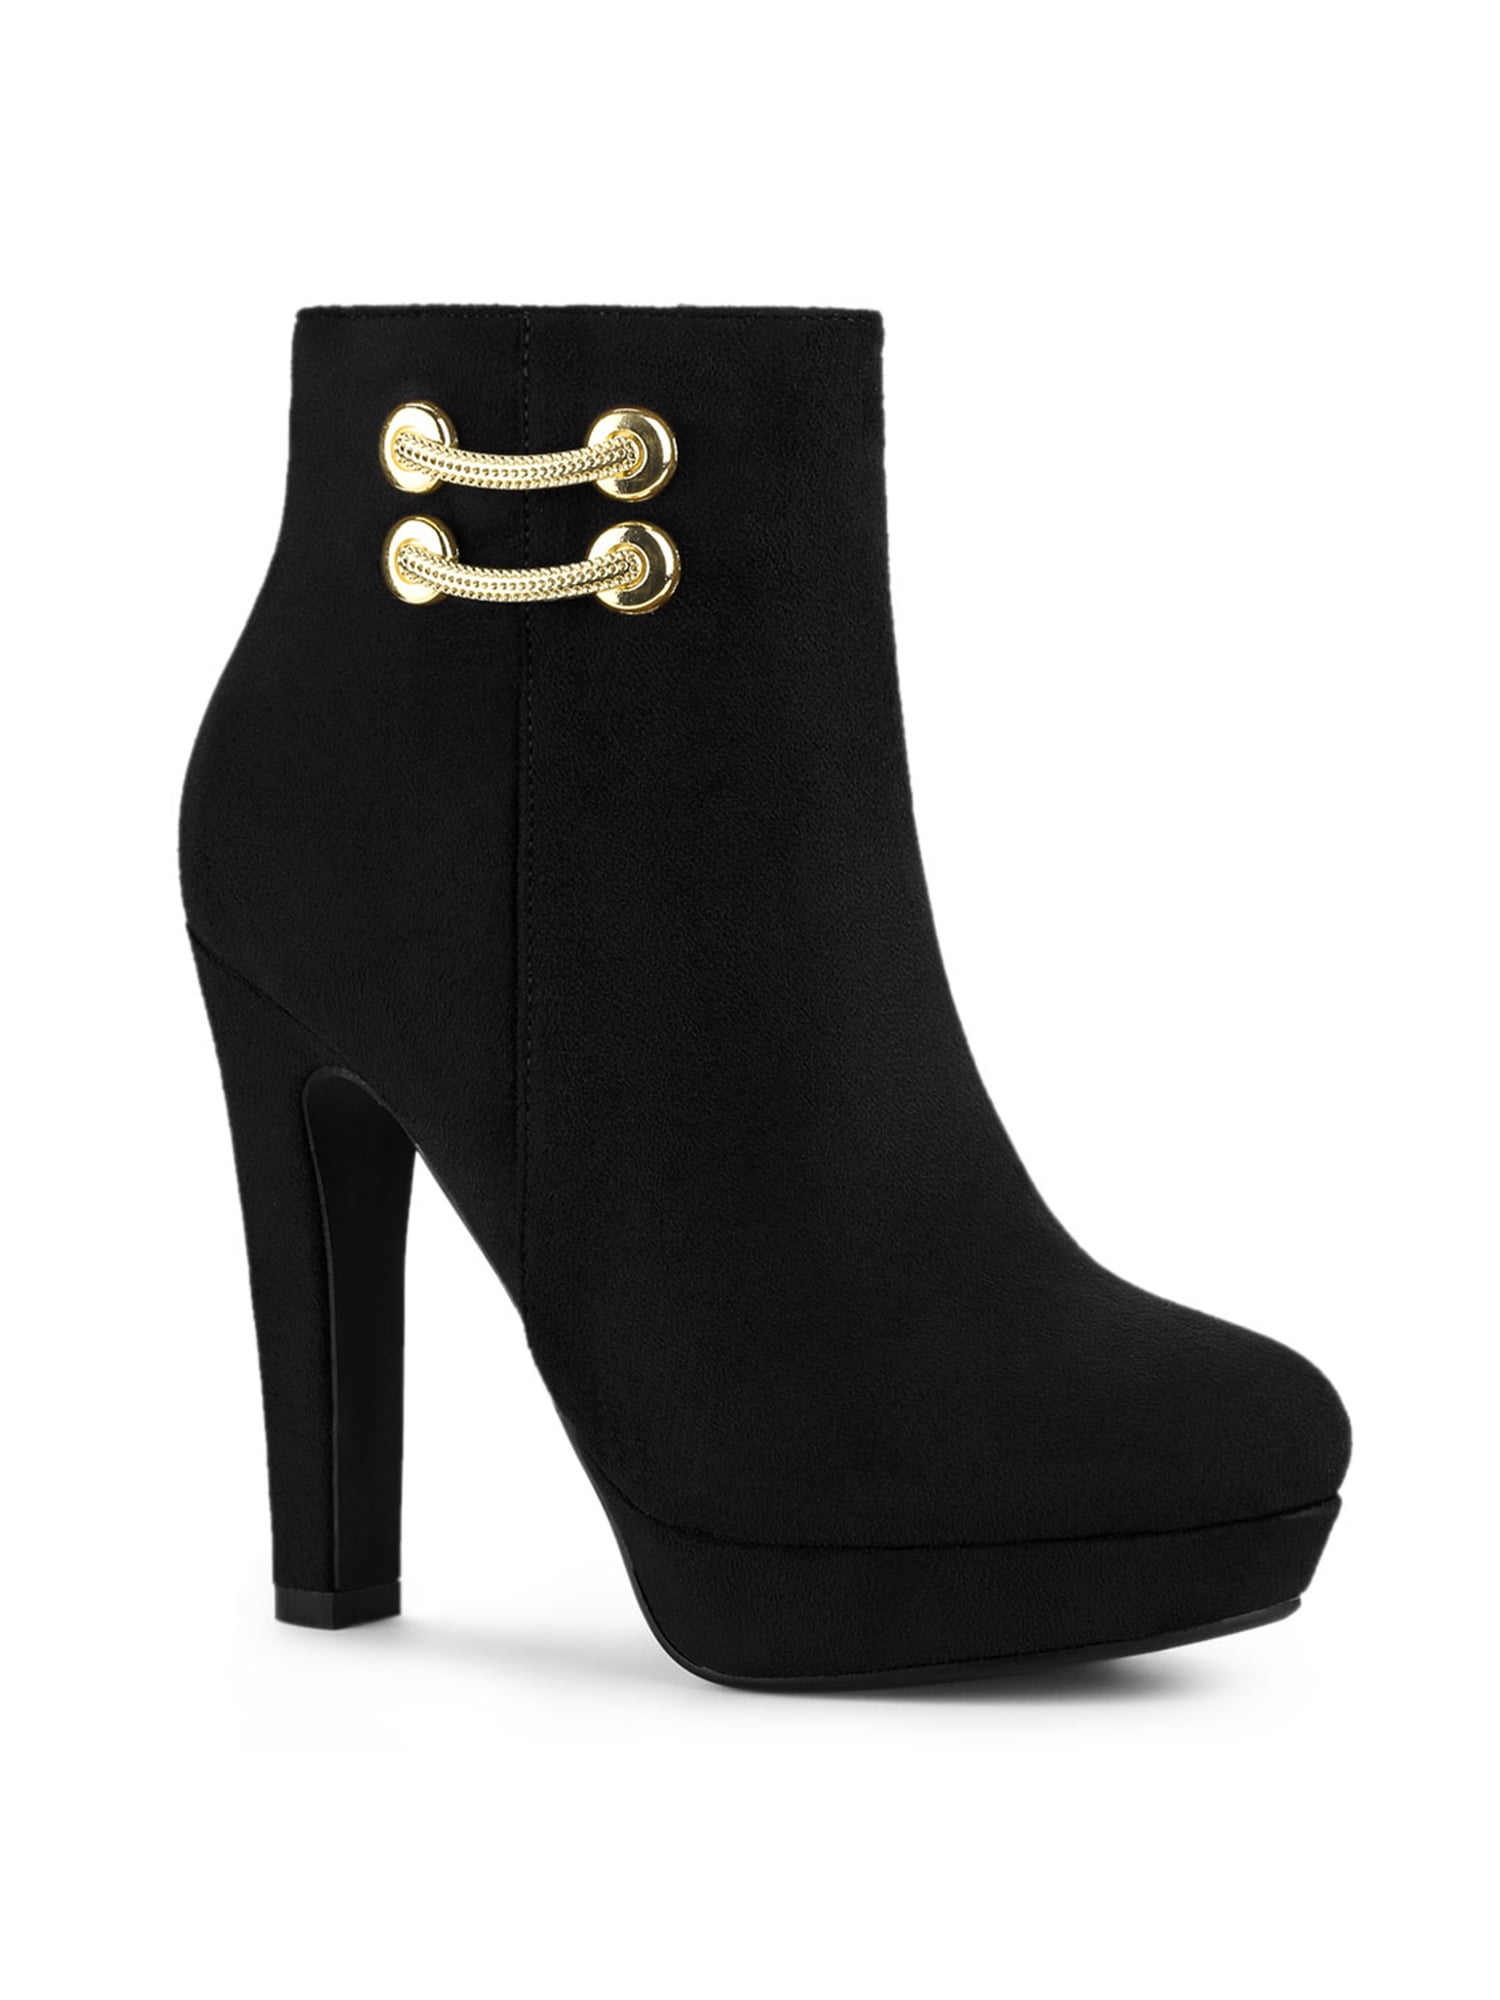 Details about   Women's Faux Leather Ankle Boots Round Toe High Heels Platform Side Zipper Shoes